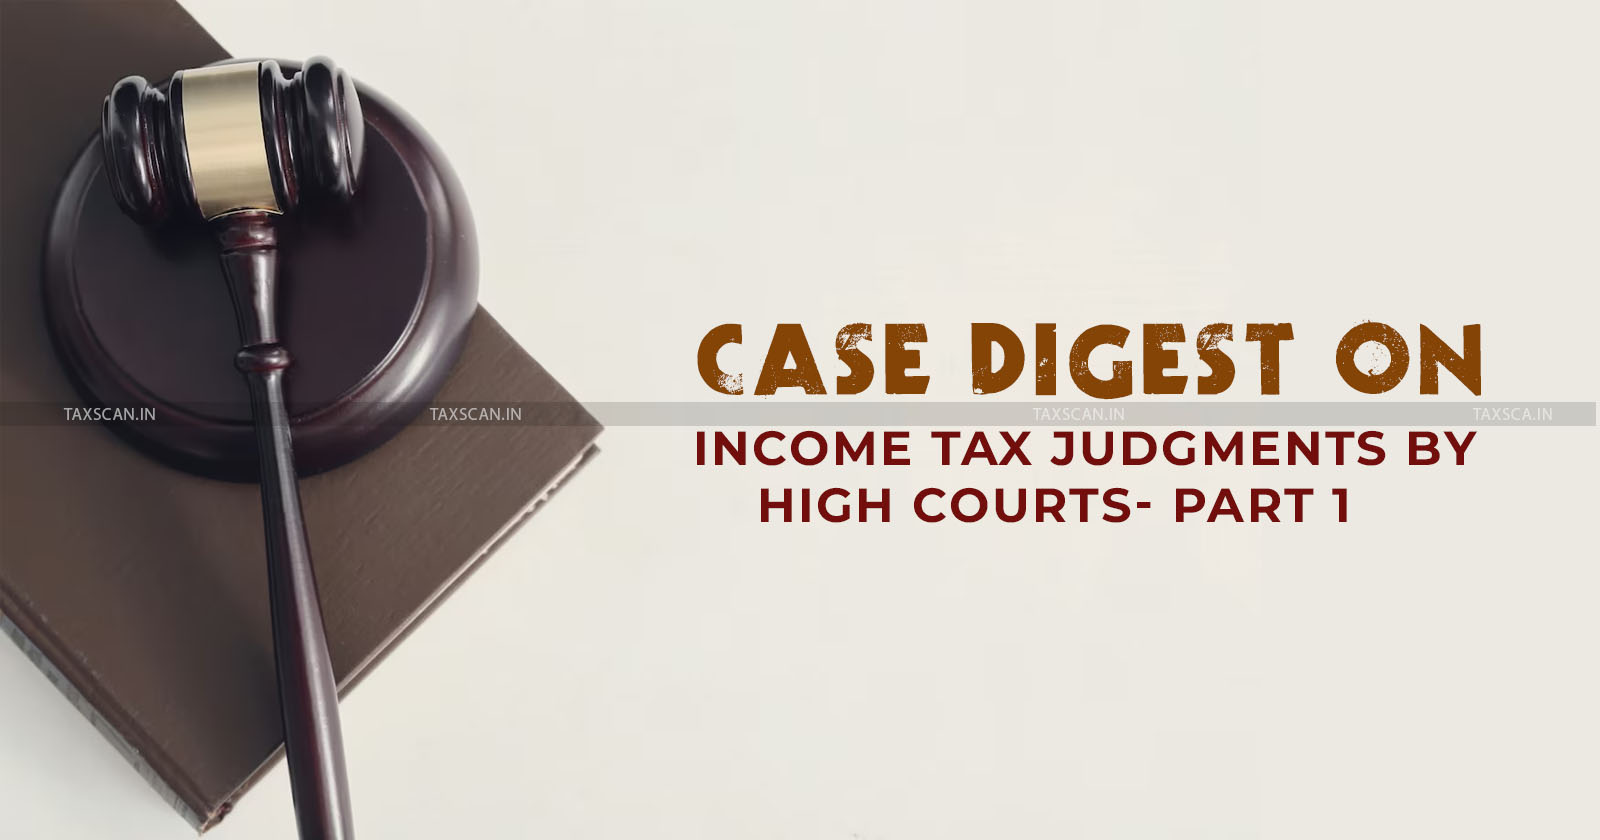 CASE DIGEST ON INCOME TAX JUDGMENTS BY HIGH COURTS 2016-17 - PART 1 - taxscan